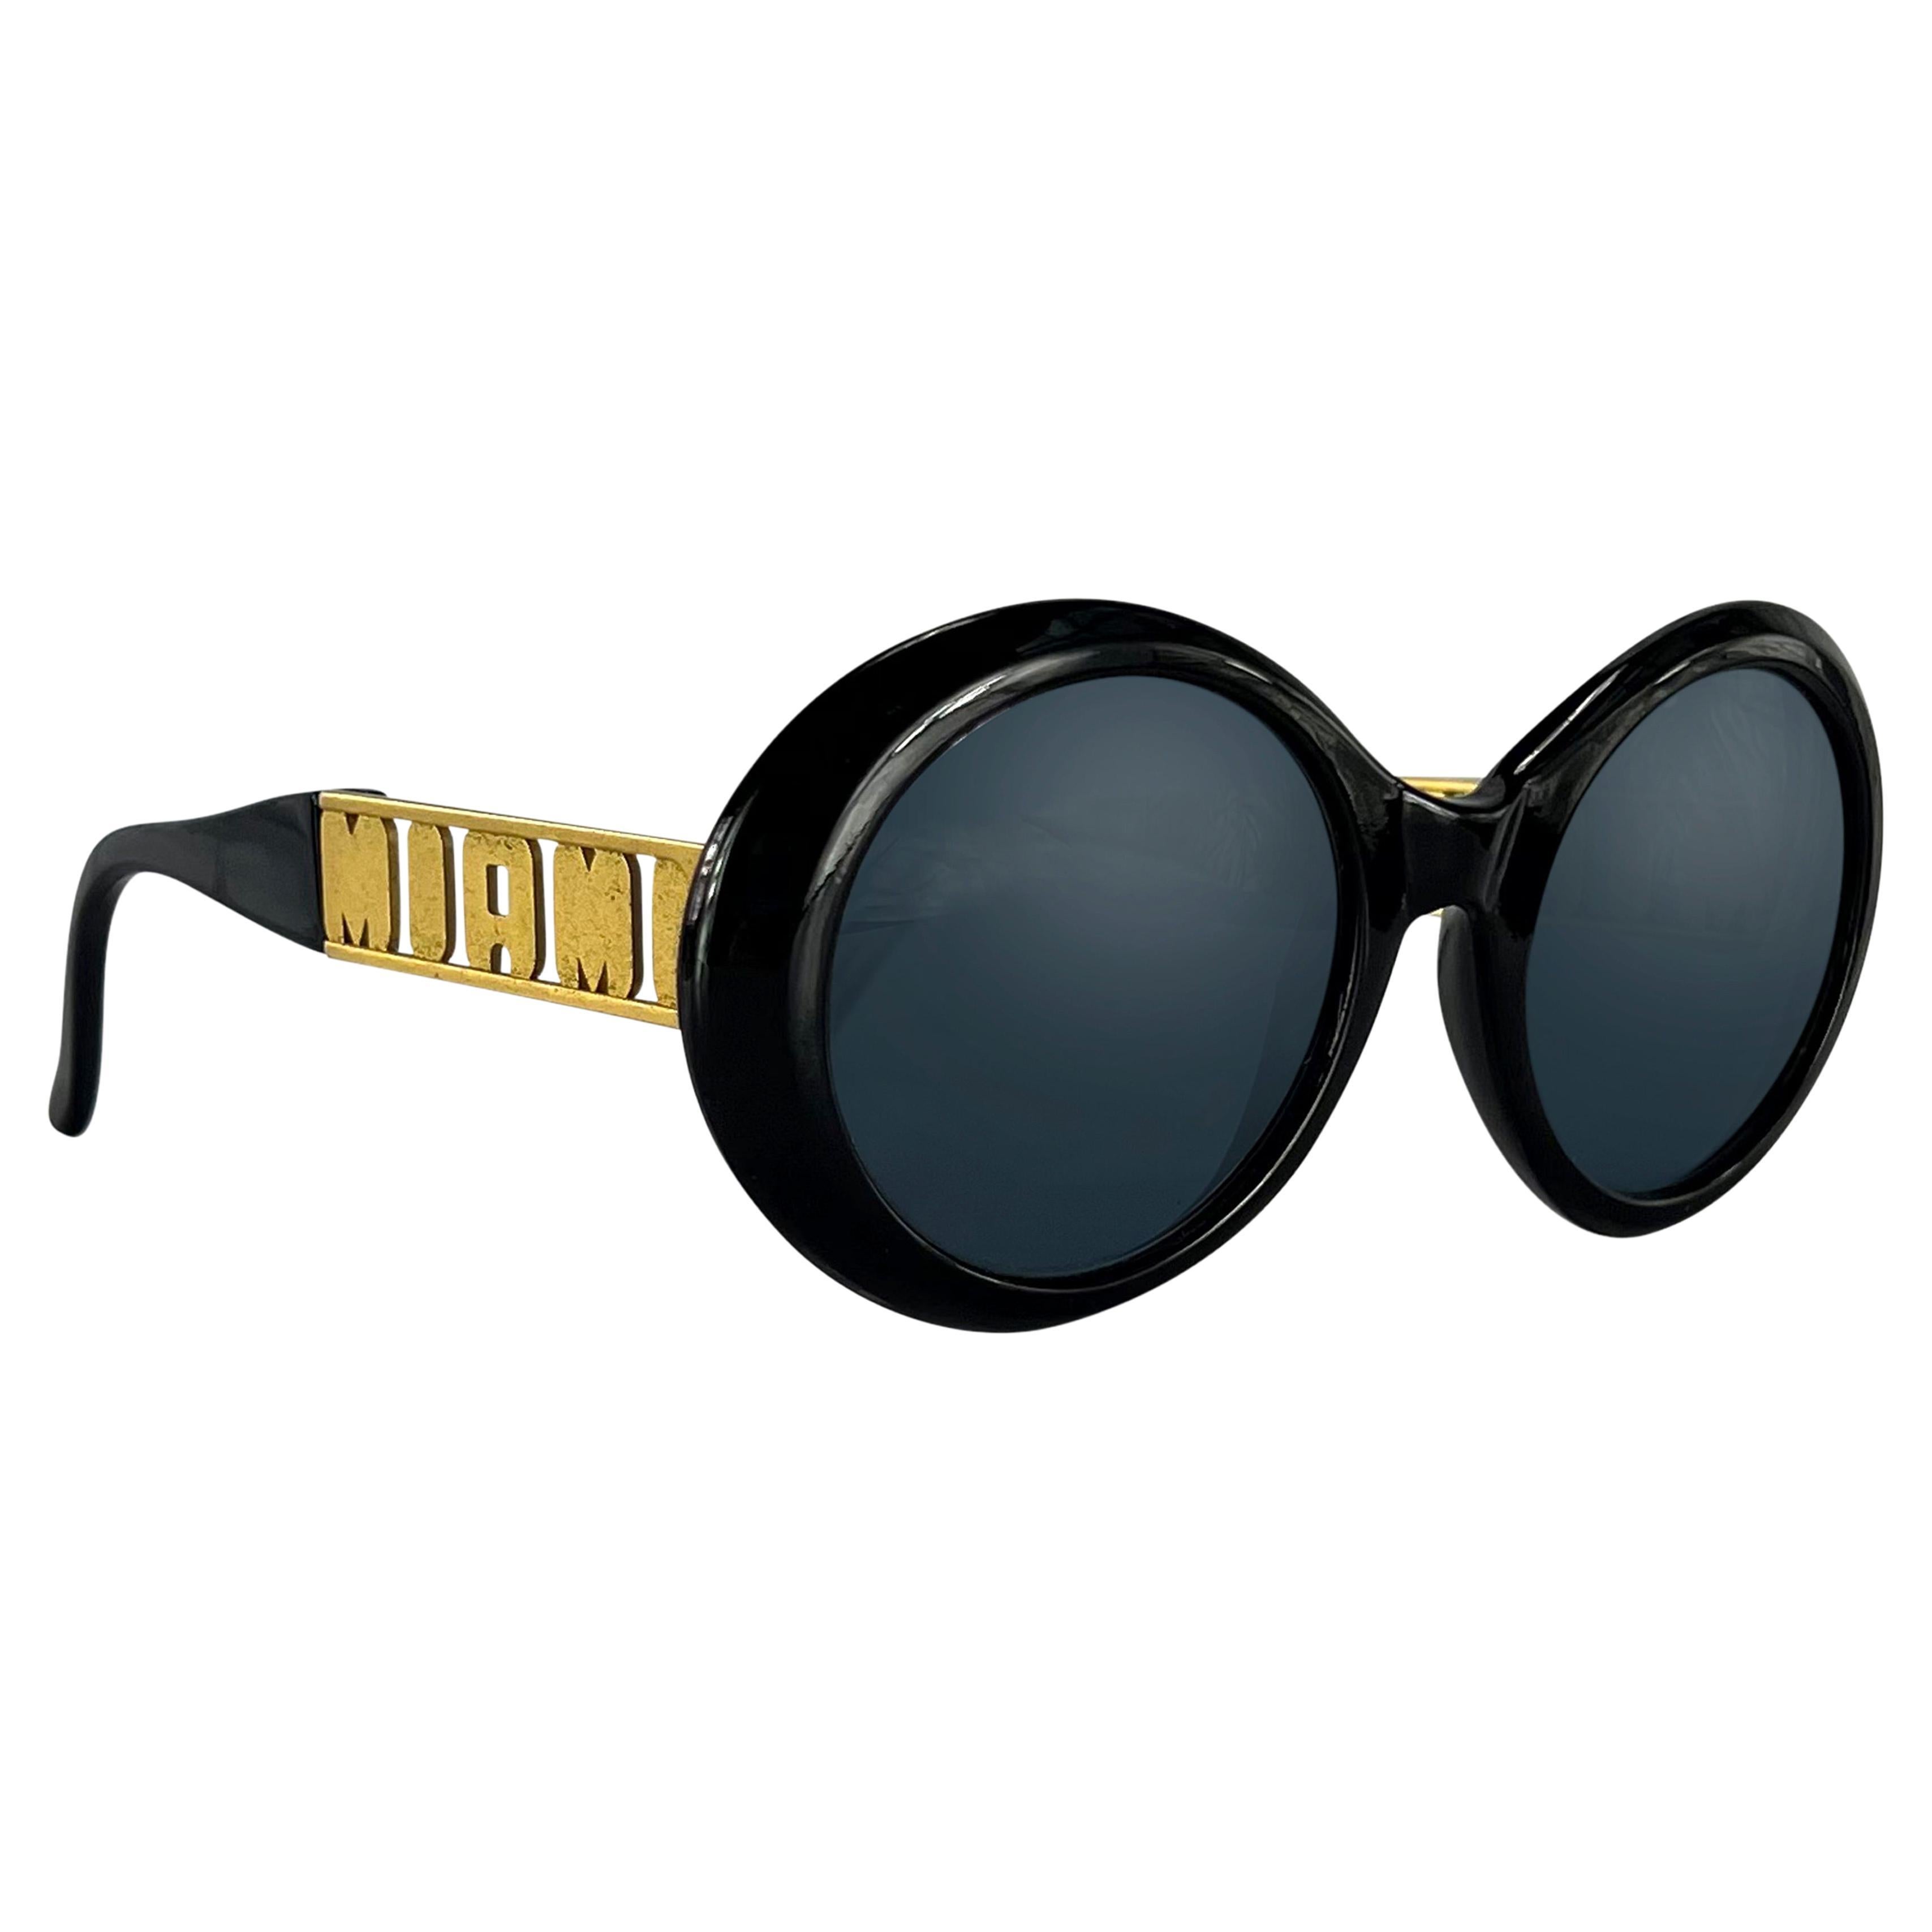 What are Versace sunglasses made of?